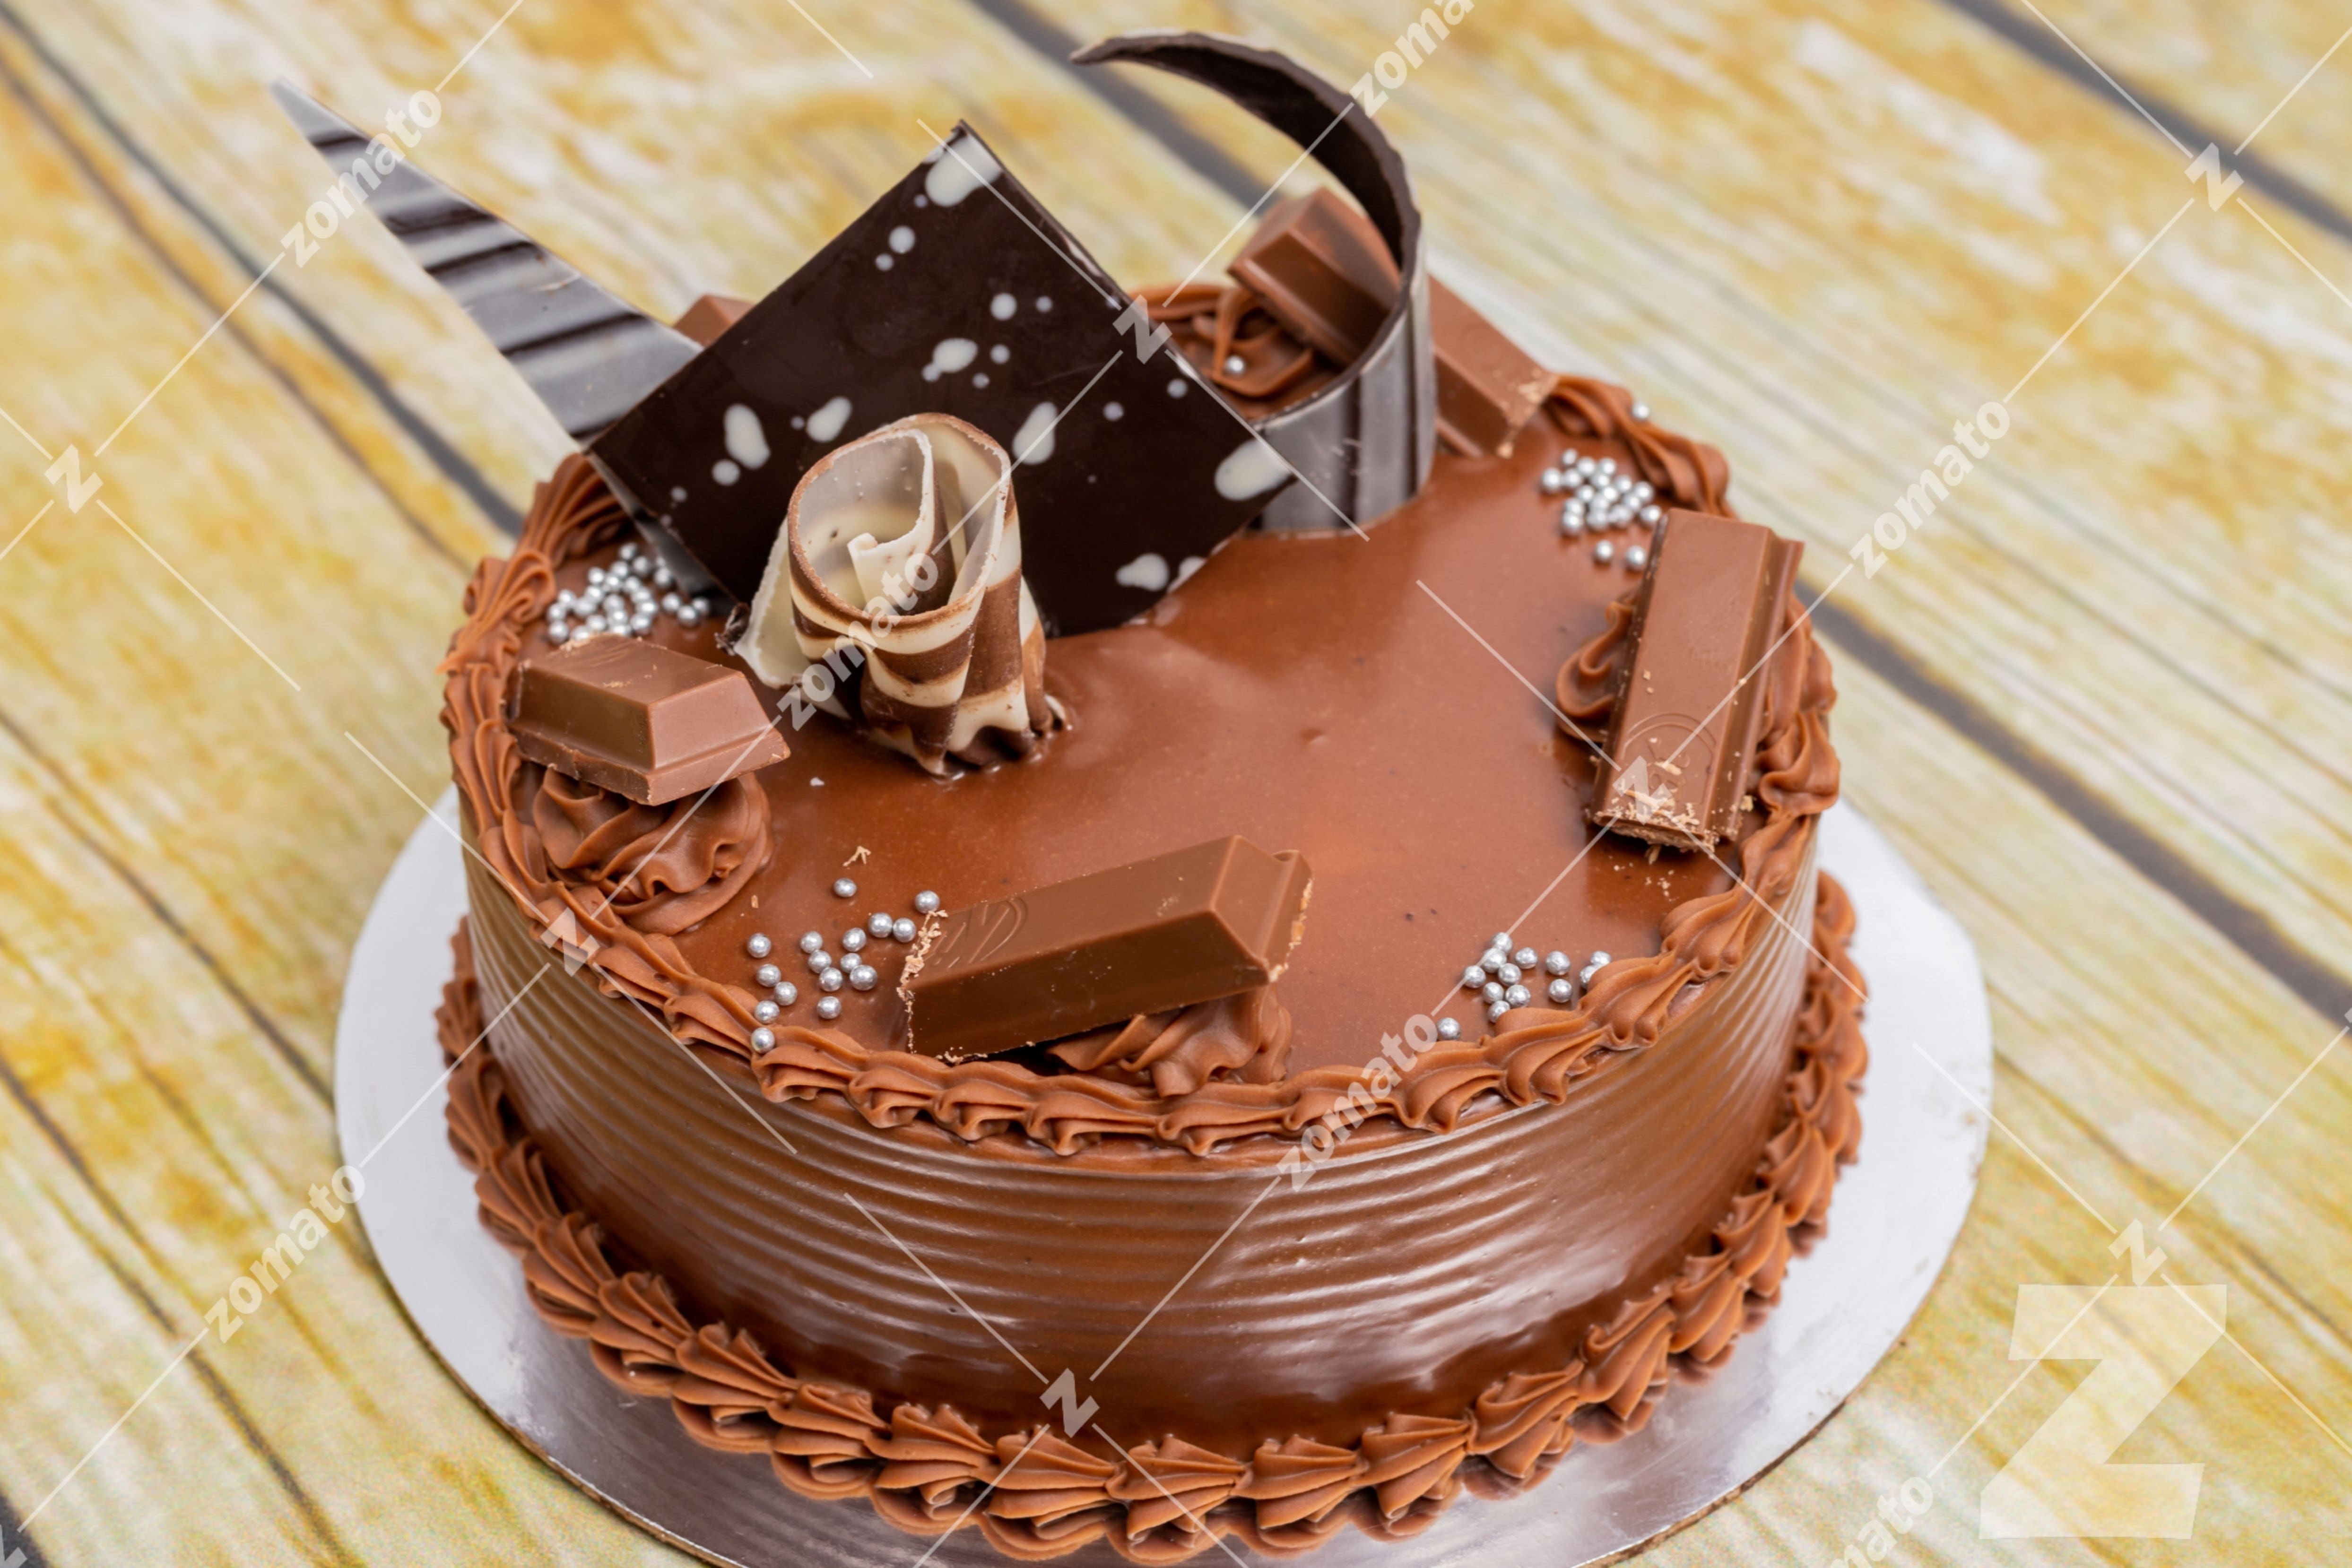 Top more than 95 zomato cake order online best - in.daotaonec